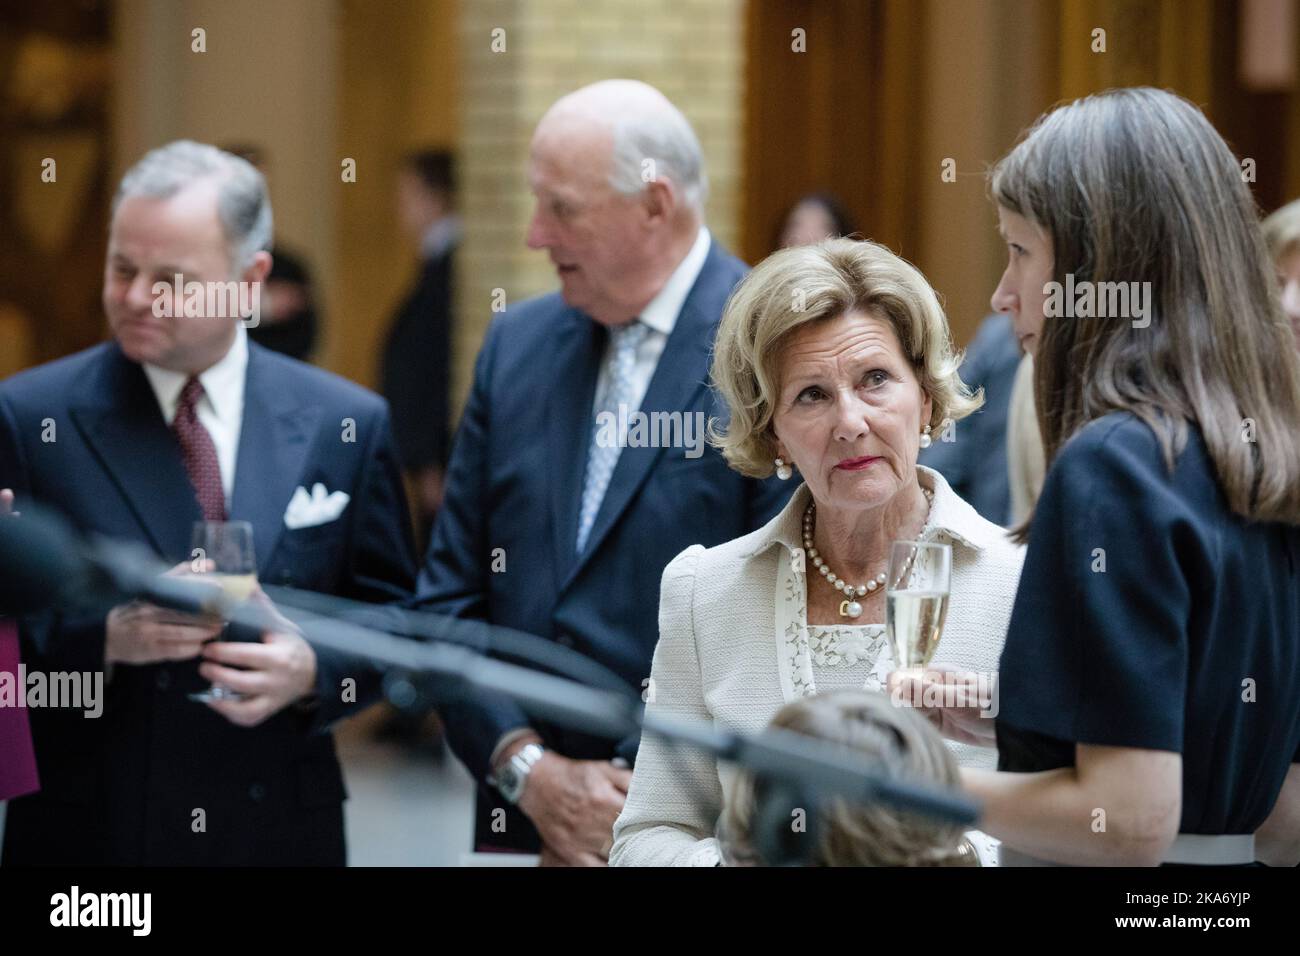 Oslo, Norway 20170918. Queen Sonja talks with artist Kira Wager during the unveiling of the King and Queen's 80th anniversary gift from the Storting (Parliament) on Monday. The gift is a painting by Kira Wager called 'King Olav V's Oath for the Storting'. President of the Storting Olemic Thommessen and King Harald in the background. Photo: Audun Braastad / NTB scanpi Stock Photo